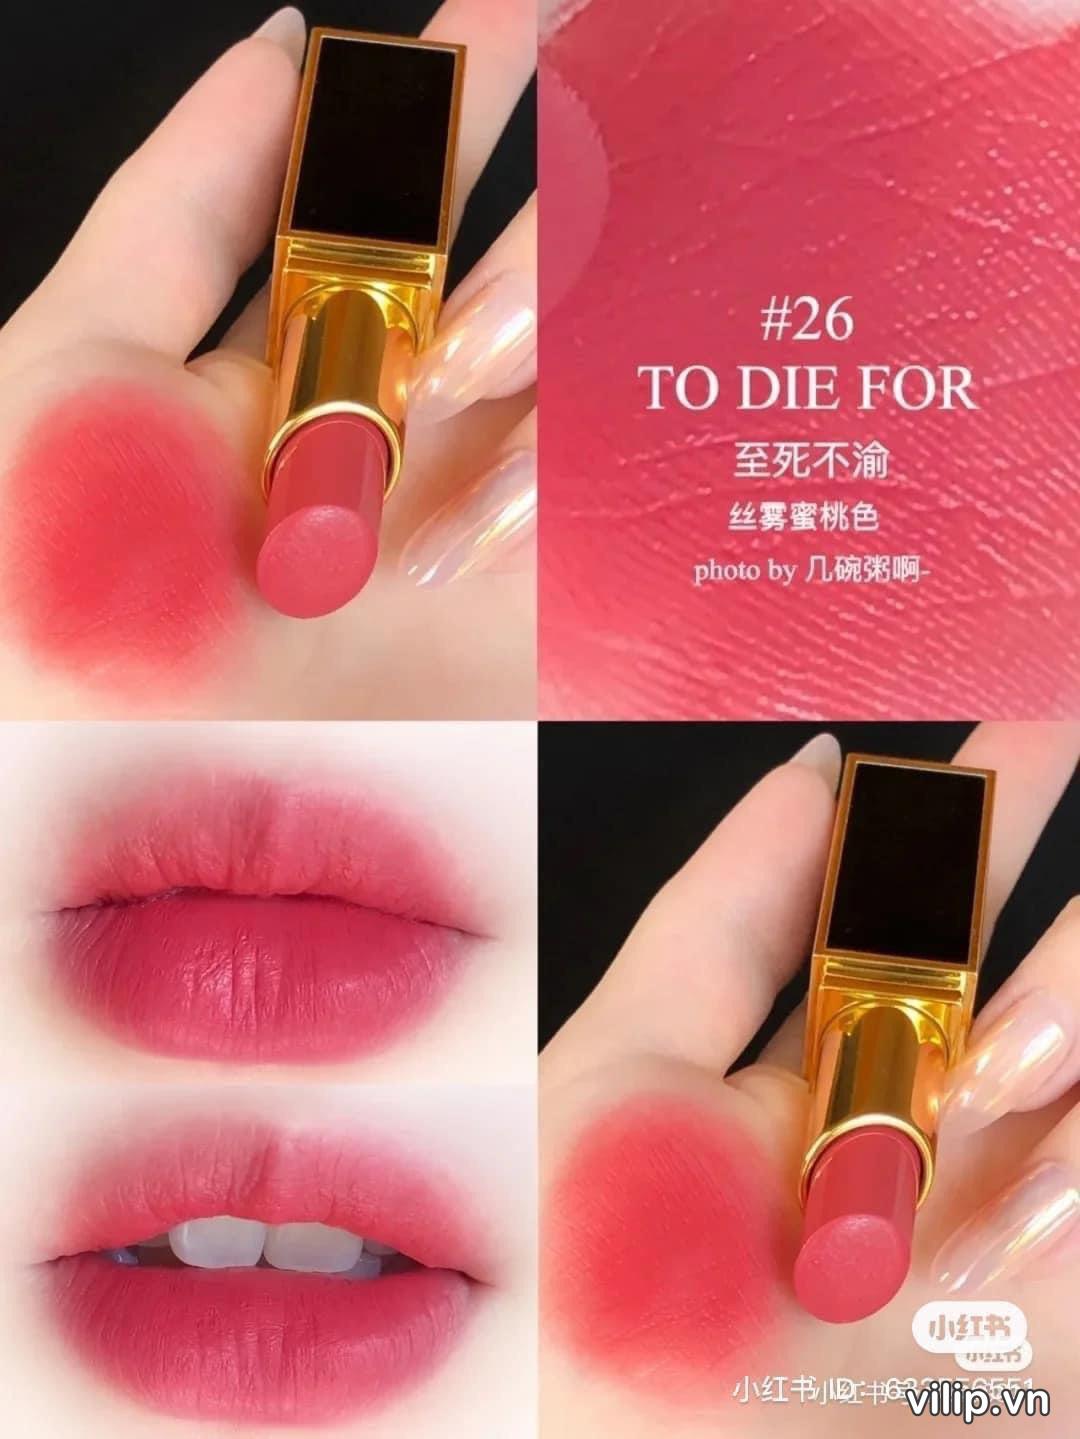 Son Tom Ford Lip Color Satin Matte 26 To Die For – Mau Hong Dat Baby 8